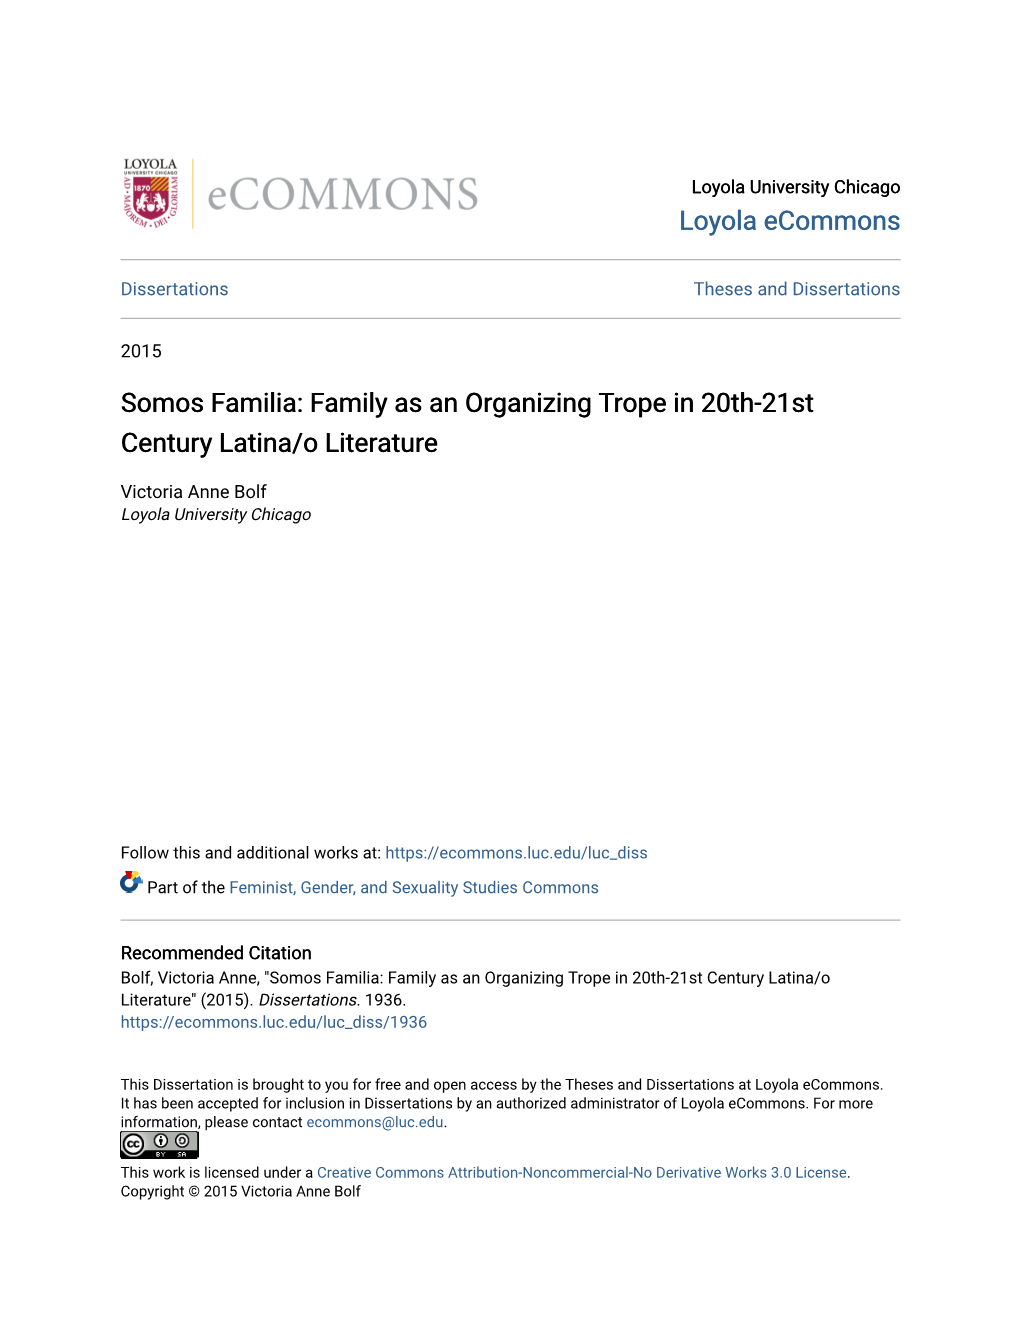 Somos Familia: Family As an Organizing Trope in 20Th-21St Century Latina/O Literature